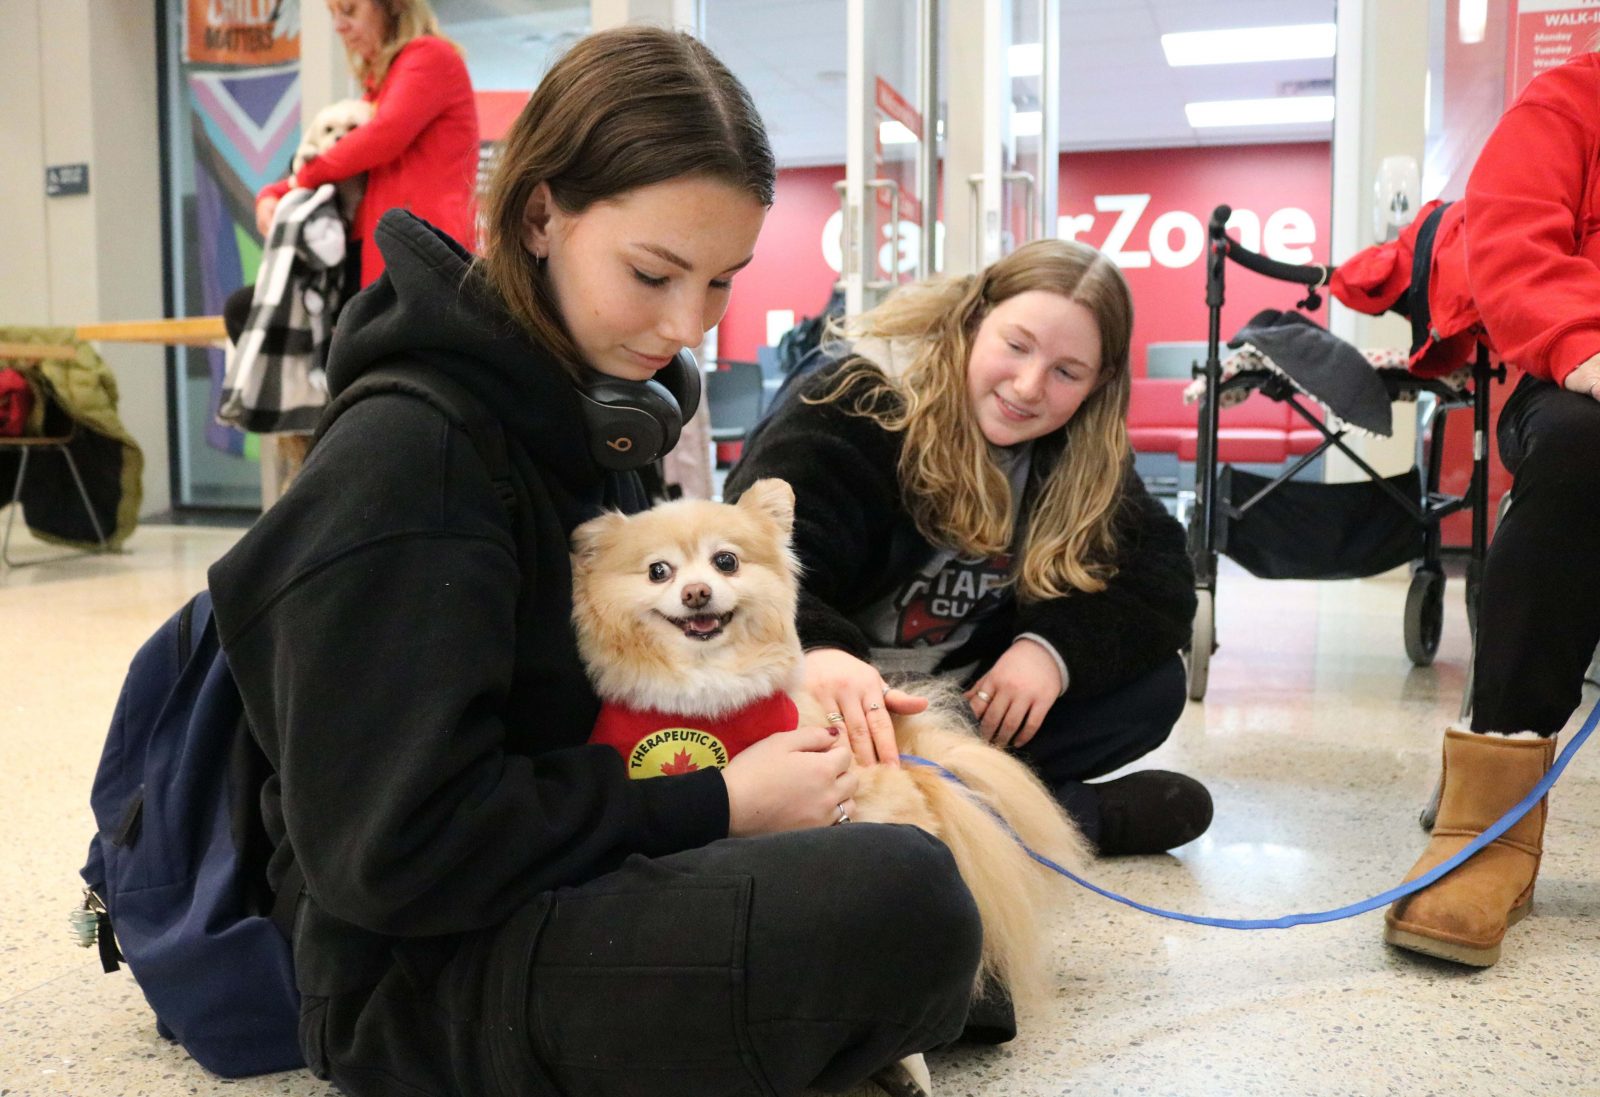 A small dog sits in a young woman’s lap while a second woman sits beside them.